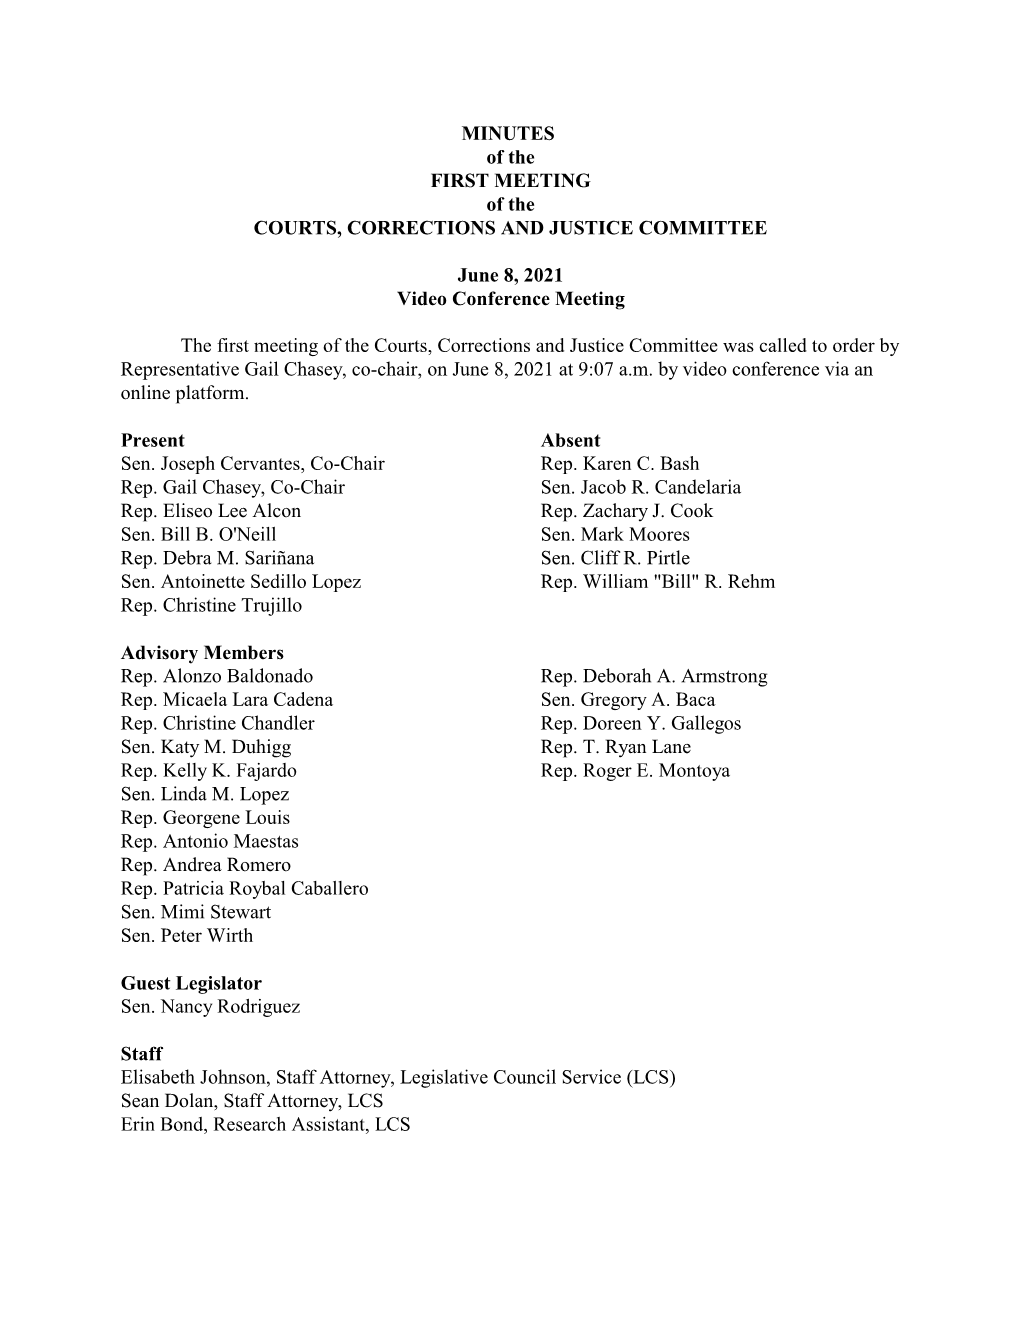 MINUTES of the FIRST MEETING of the COURTS, CORRECTIONS and JUSTICE COMMITTEE